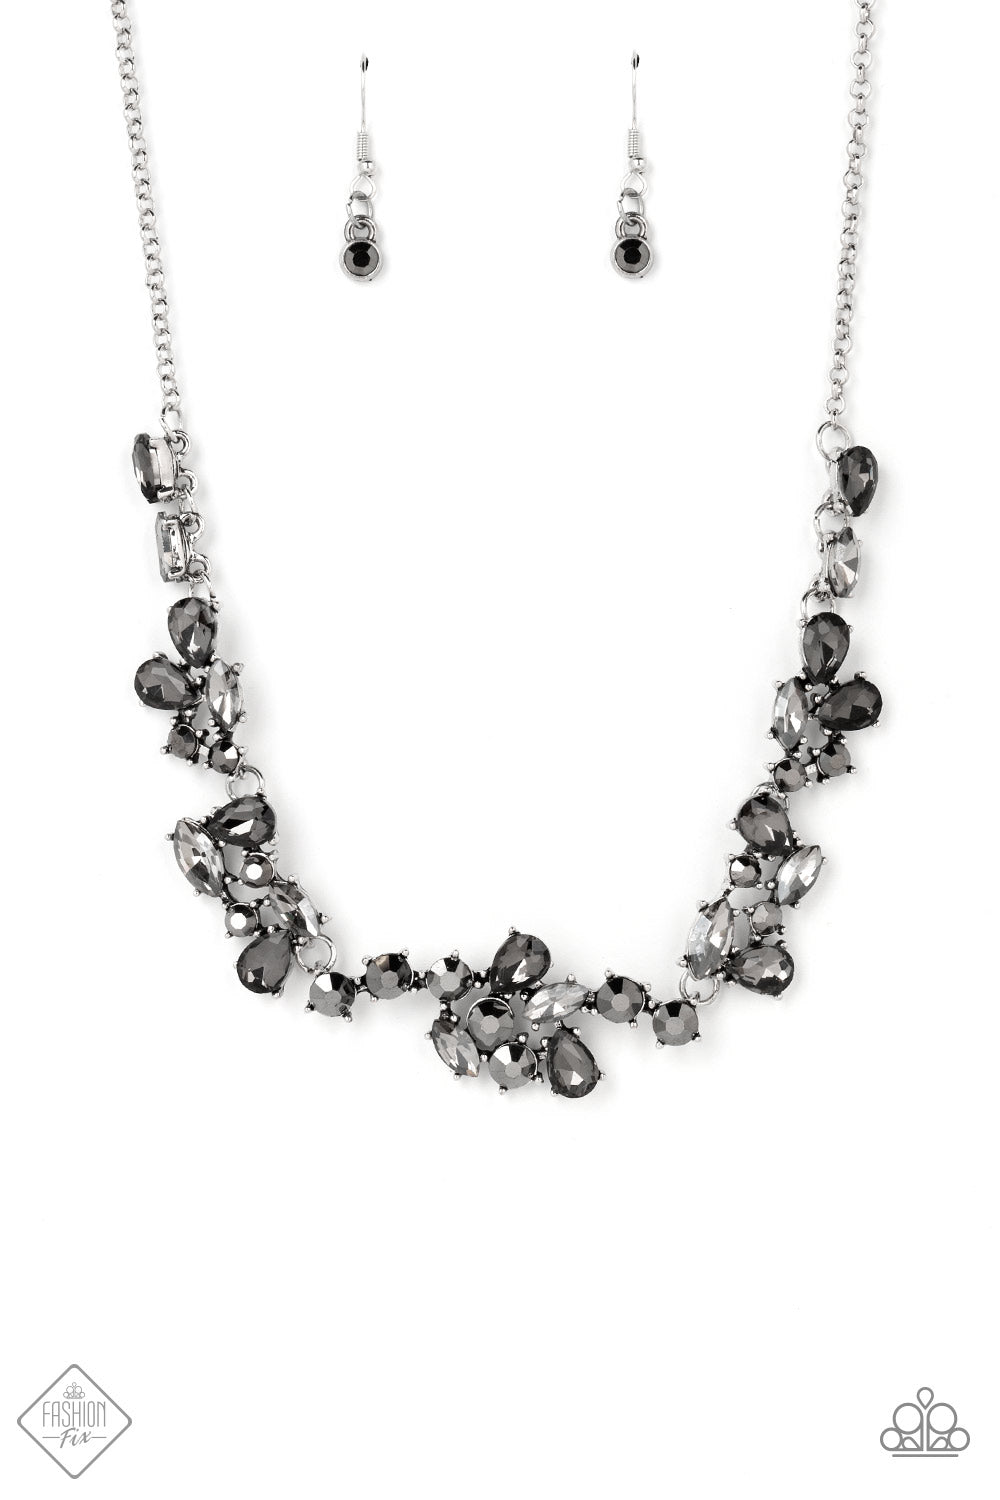 Welcome to the Ice Age - silver - Paparazzi necklace